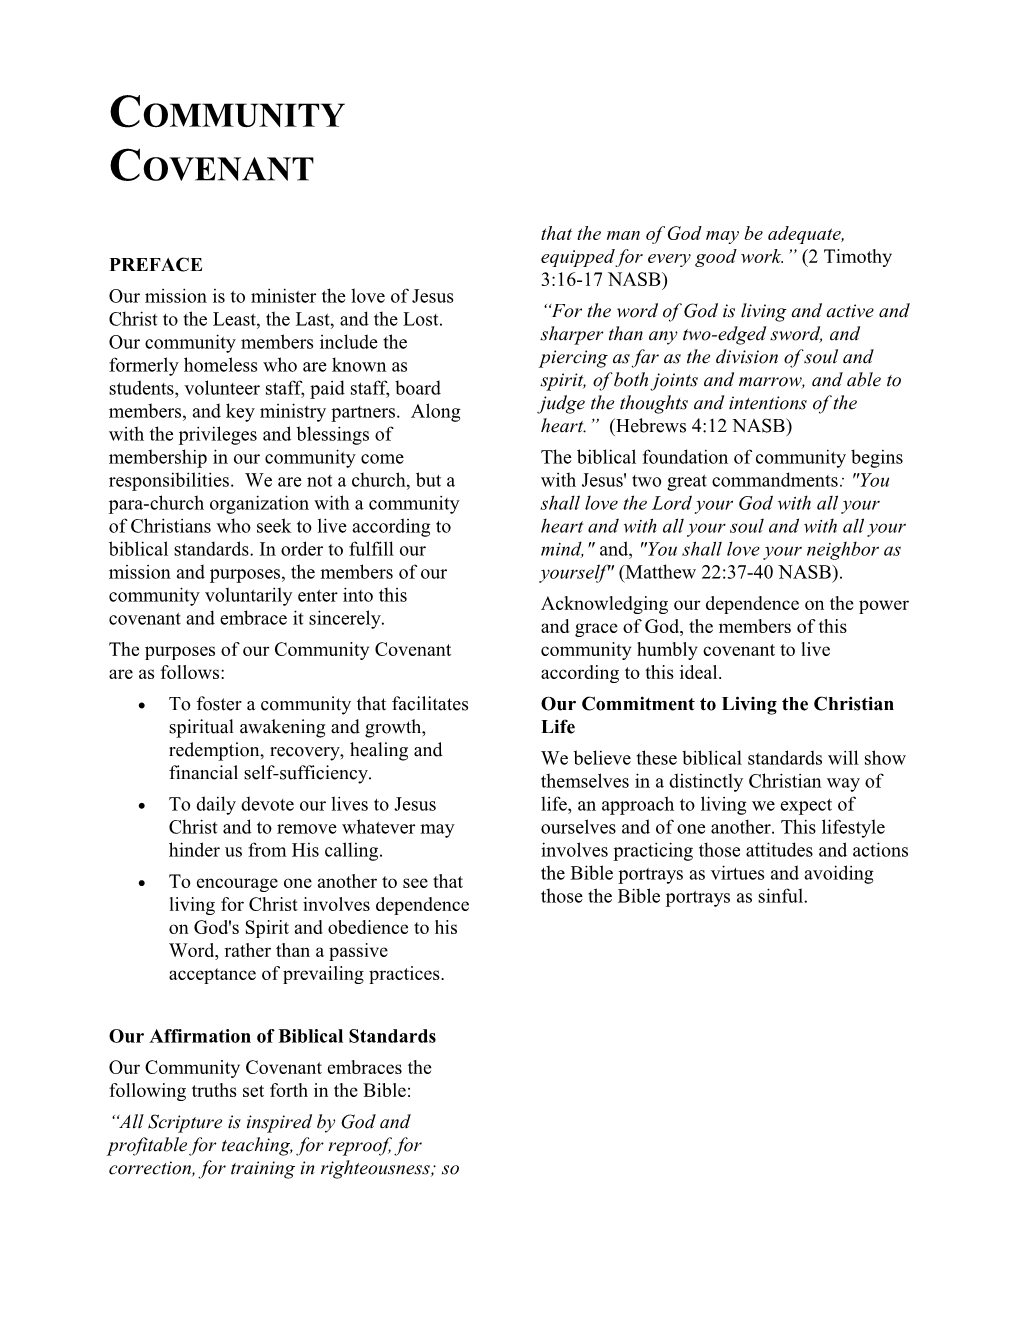 The Purposes of Our Community Covenant Are As Follows